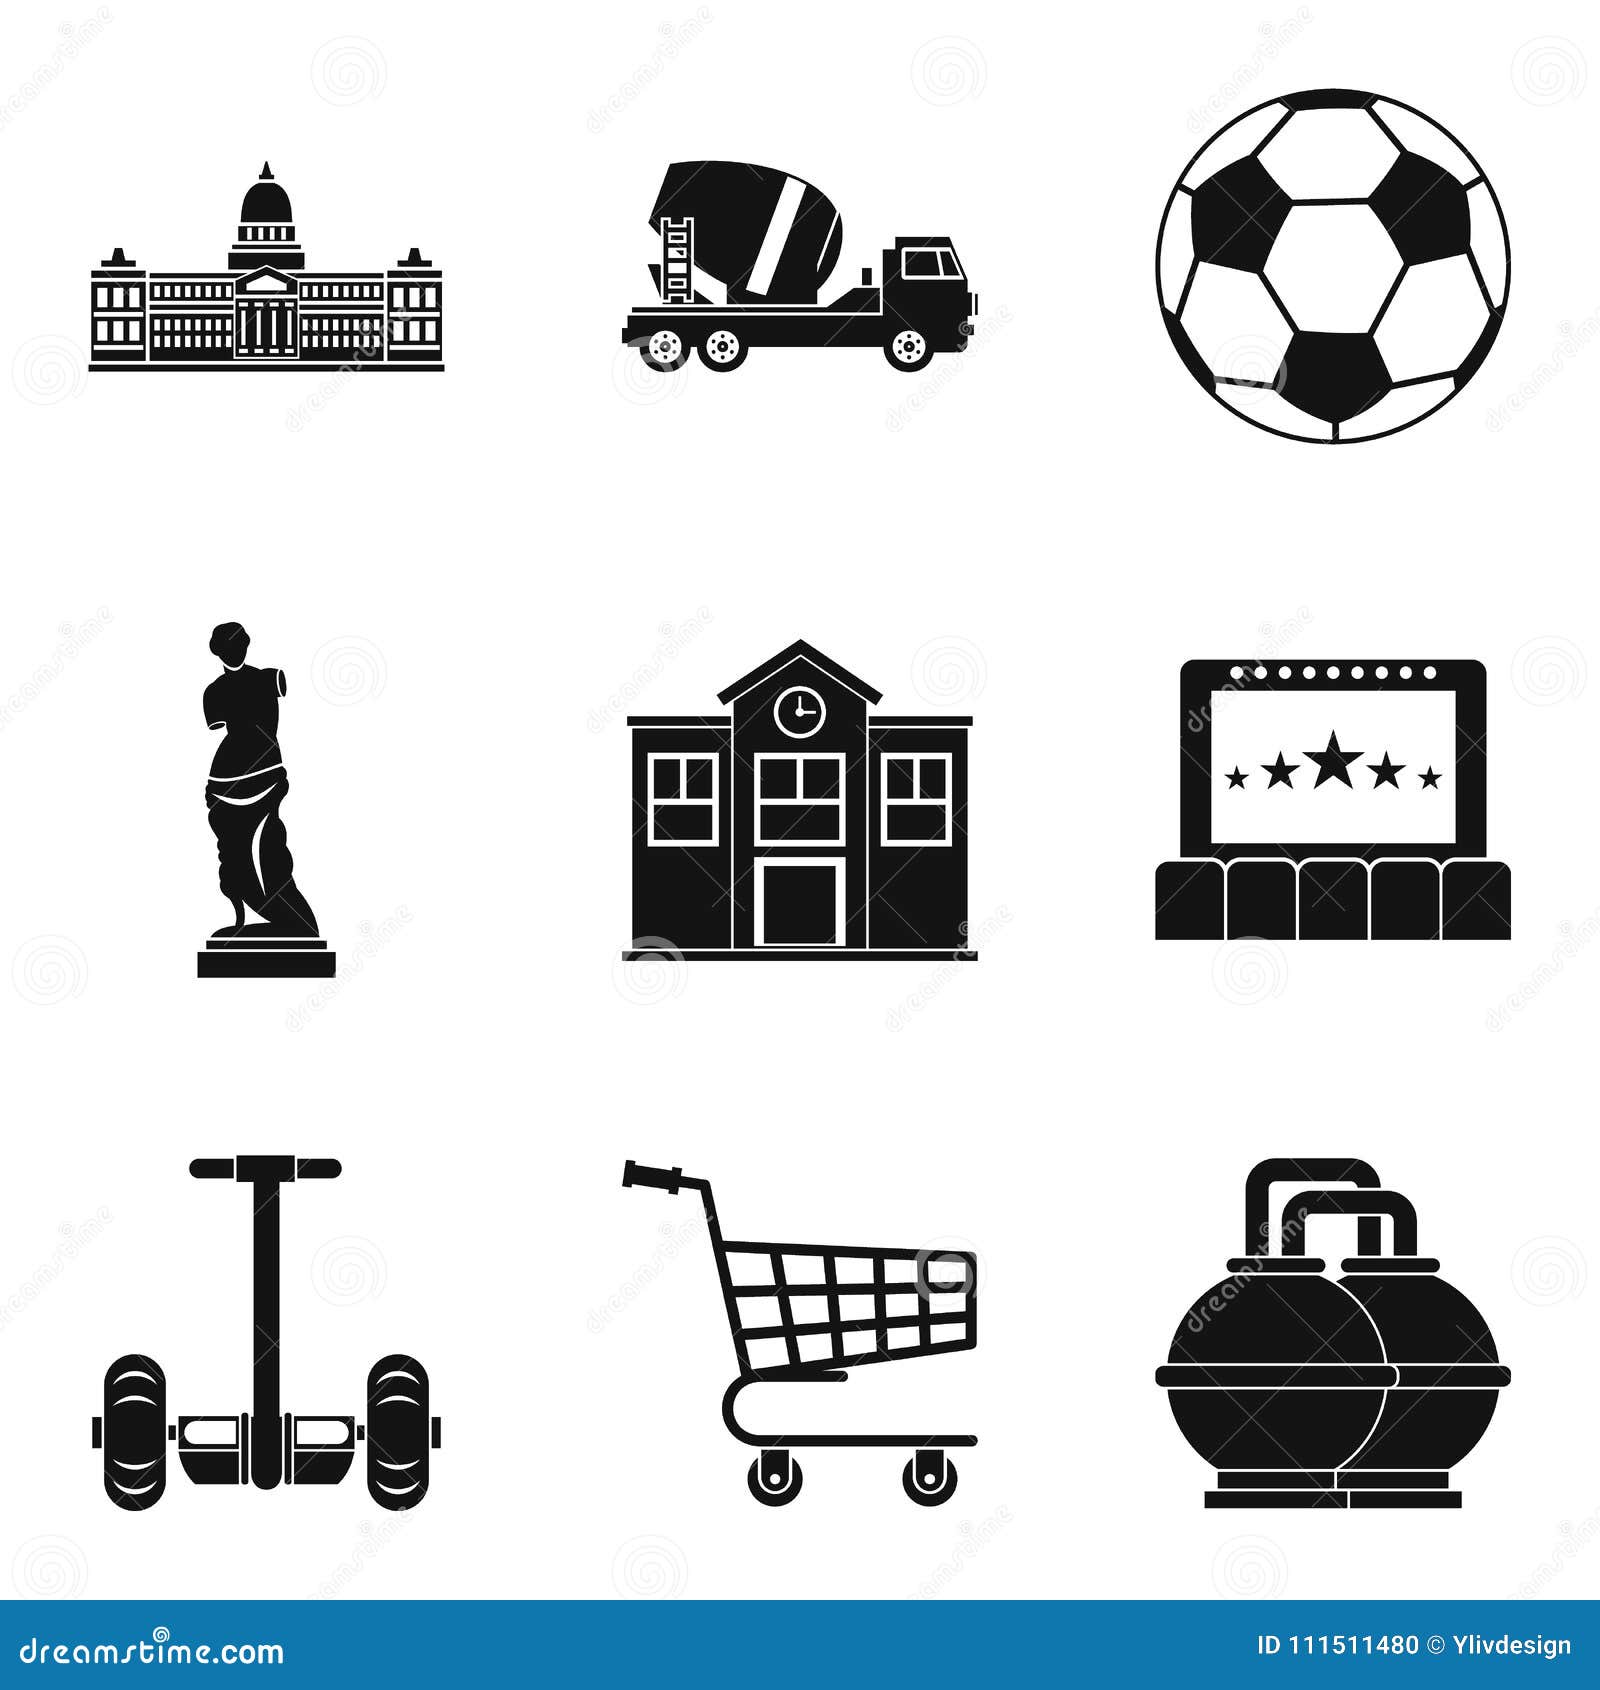 townplanning icons set, simple style